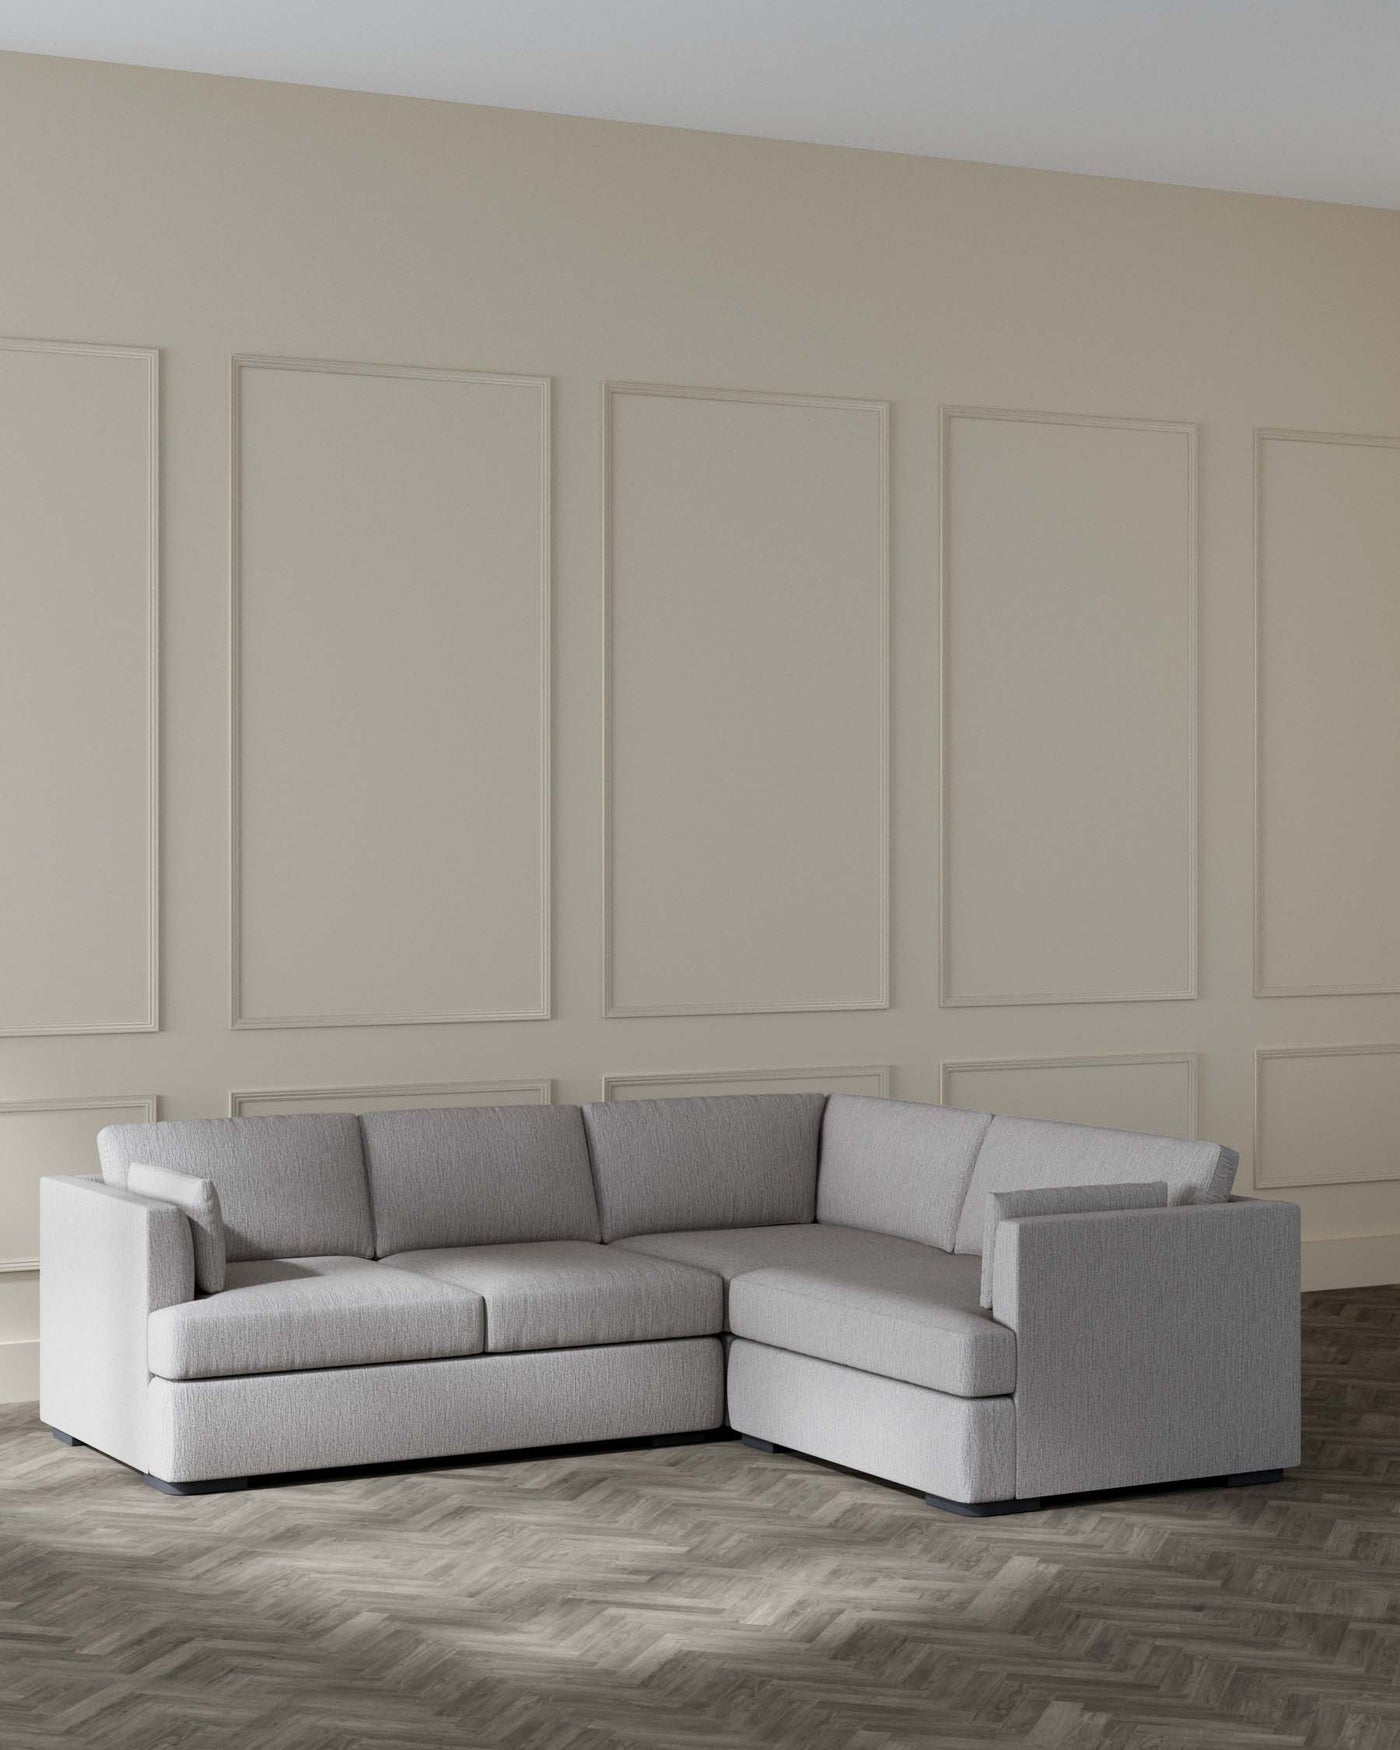 A modern light grey fabric sectional sofa with a chaise lounge on the right side, featuring clean lines, boxy cushions, and low-profile armrests, situated on a herringbone patterned wooden floor, against a wall with elegant decorative moulding.